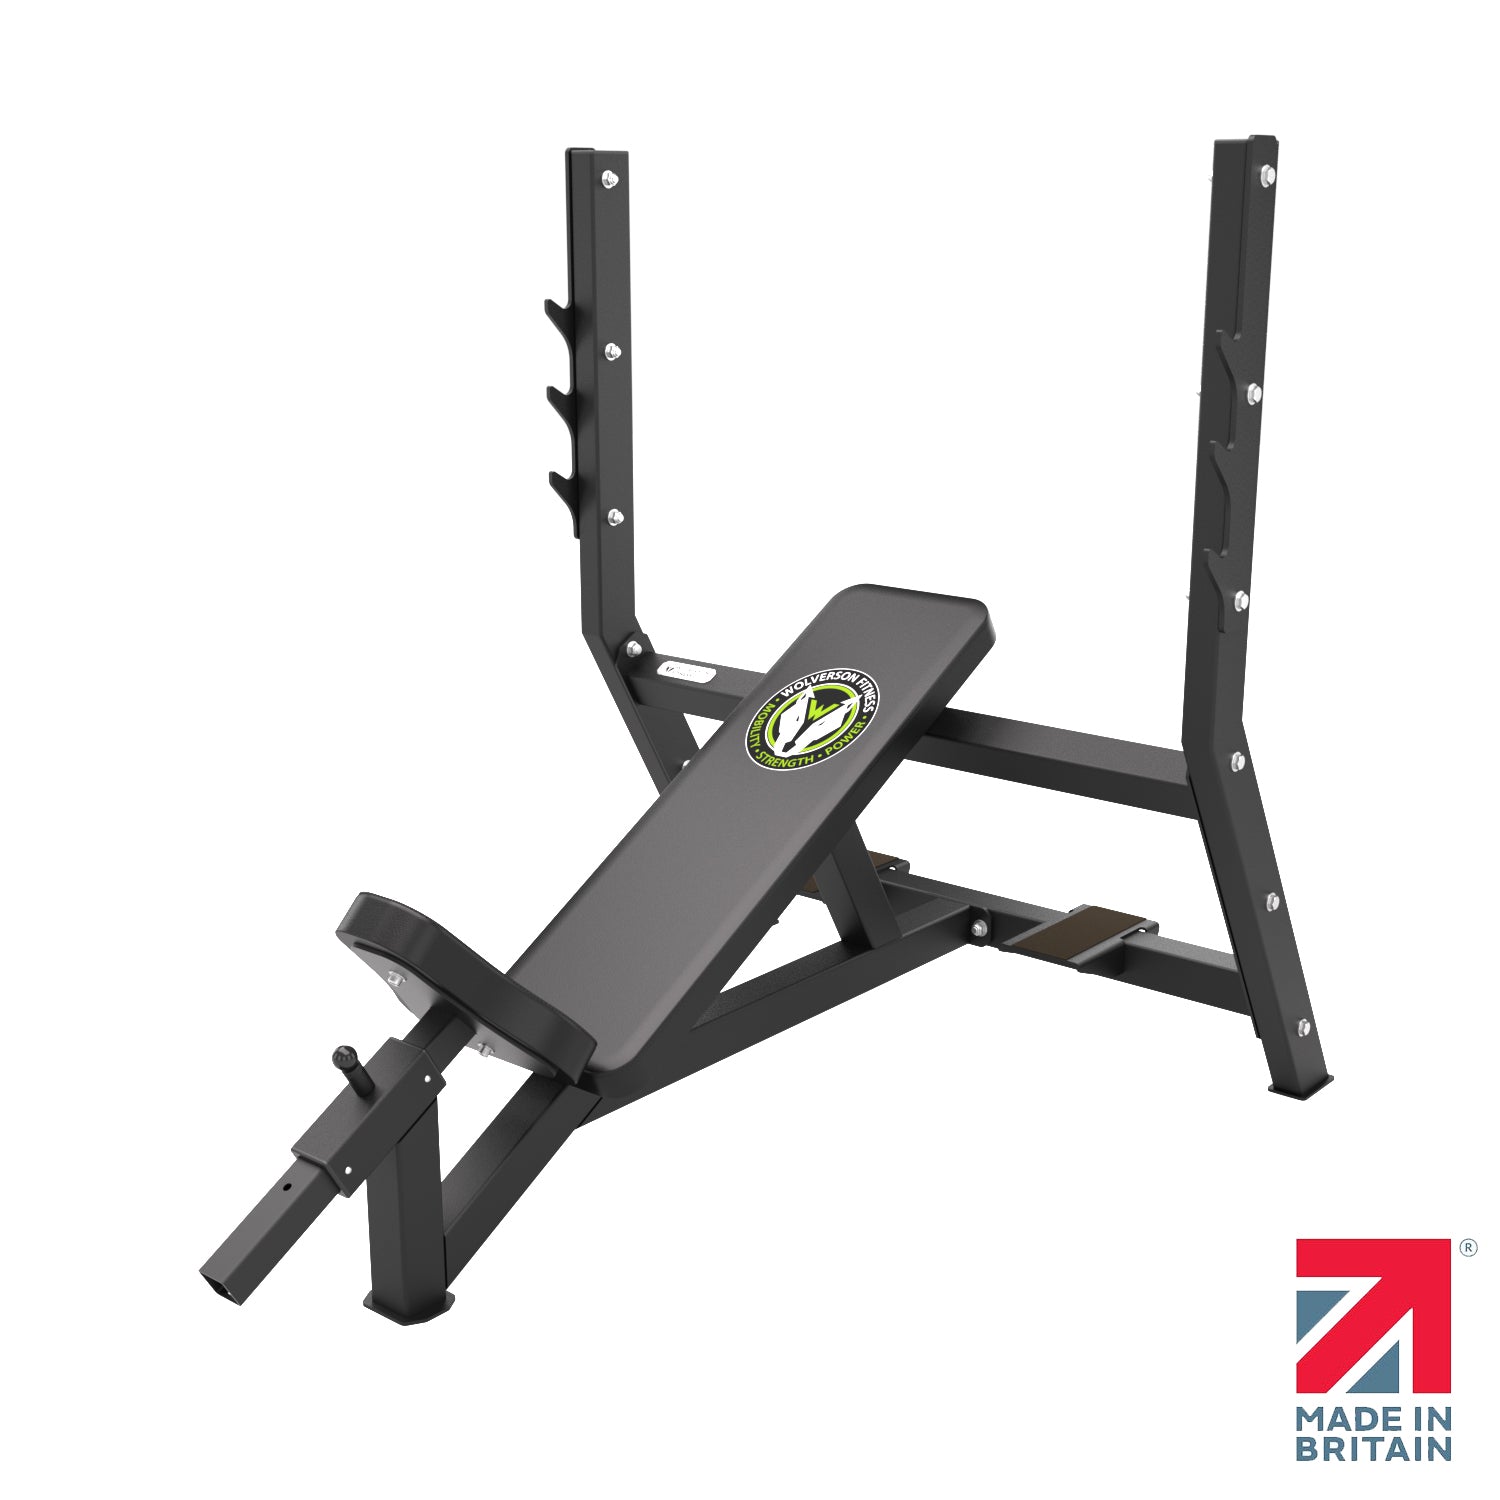 The Colossus Series Olympic Incline Bench